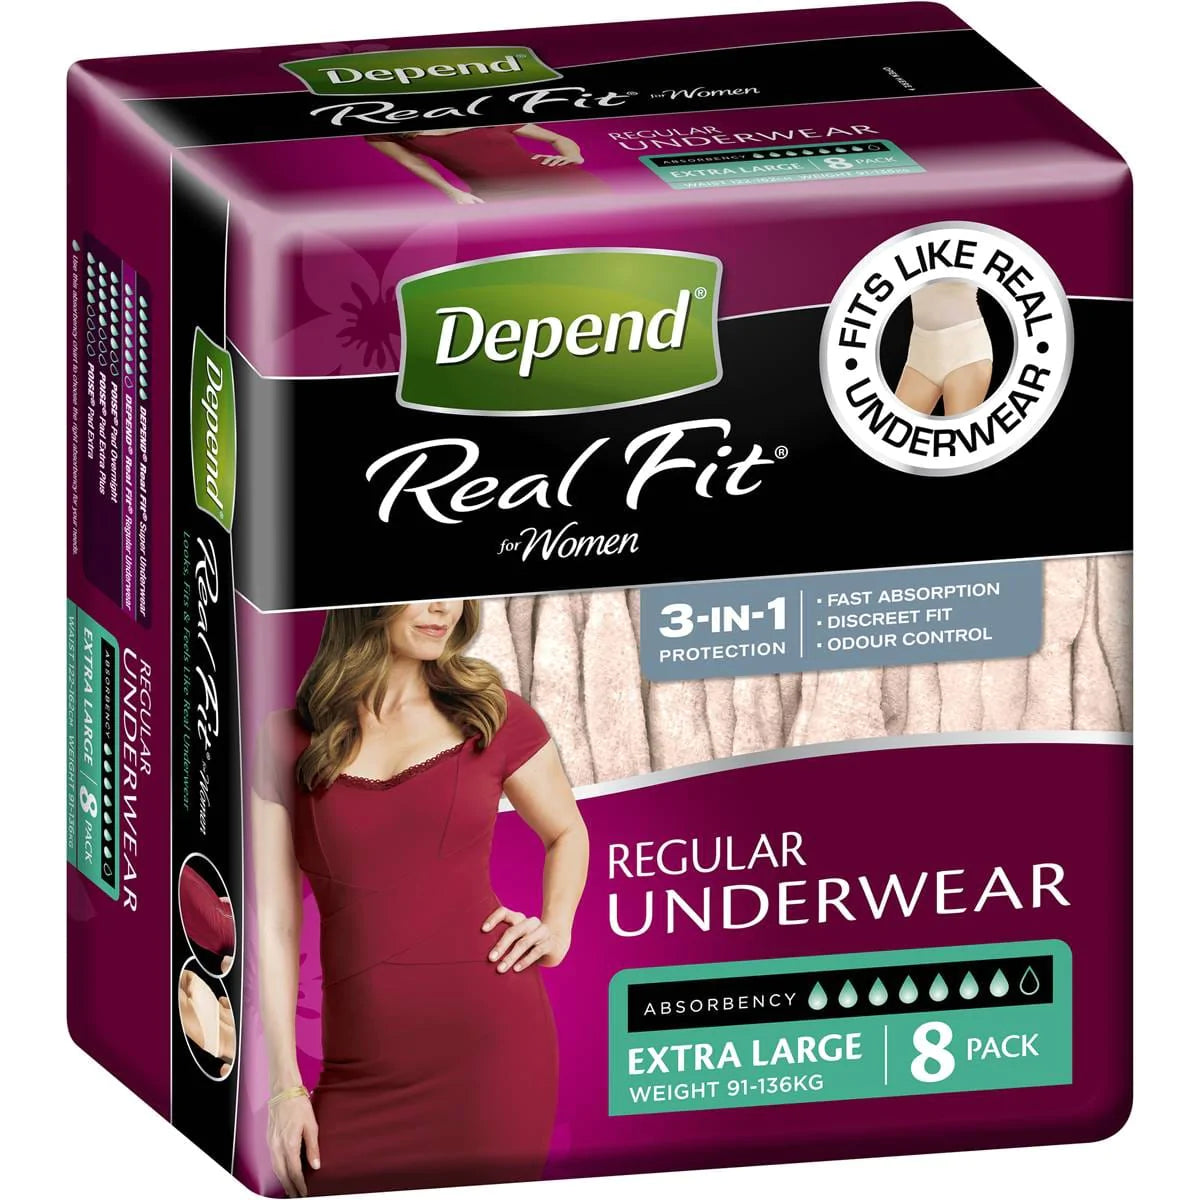 Depend X-Large / Carton of 32 Depend Real Fit for Women KIM19604__CT